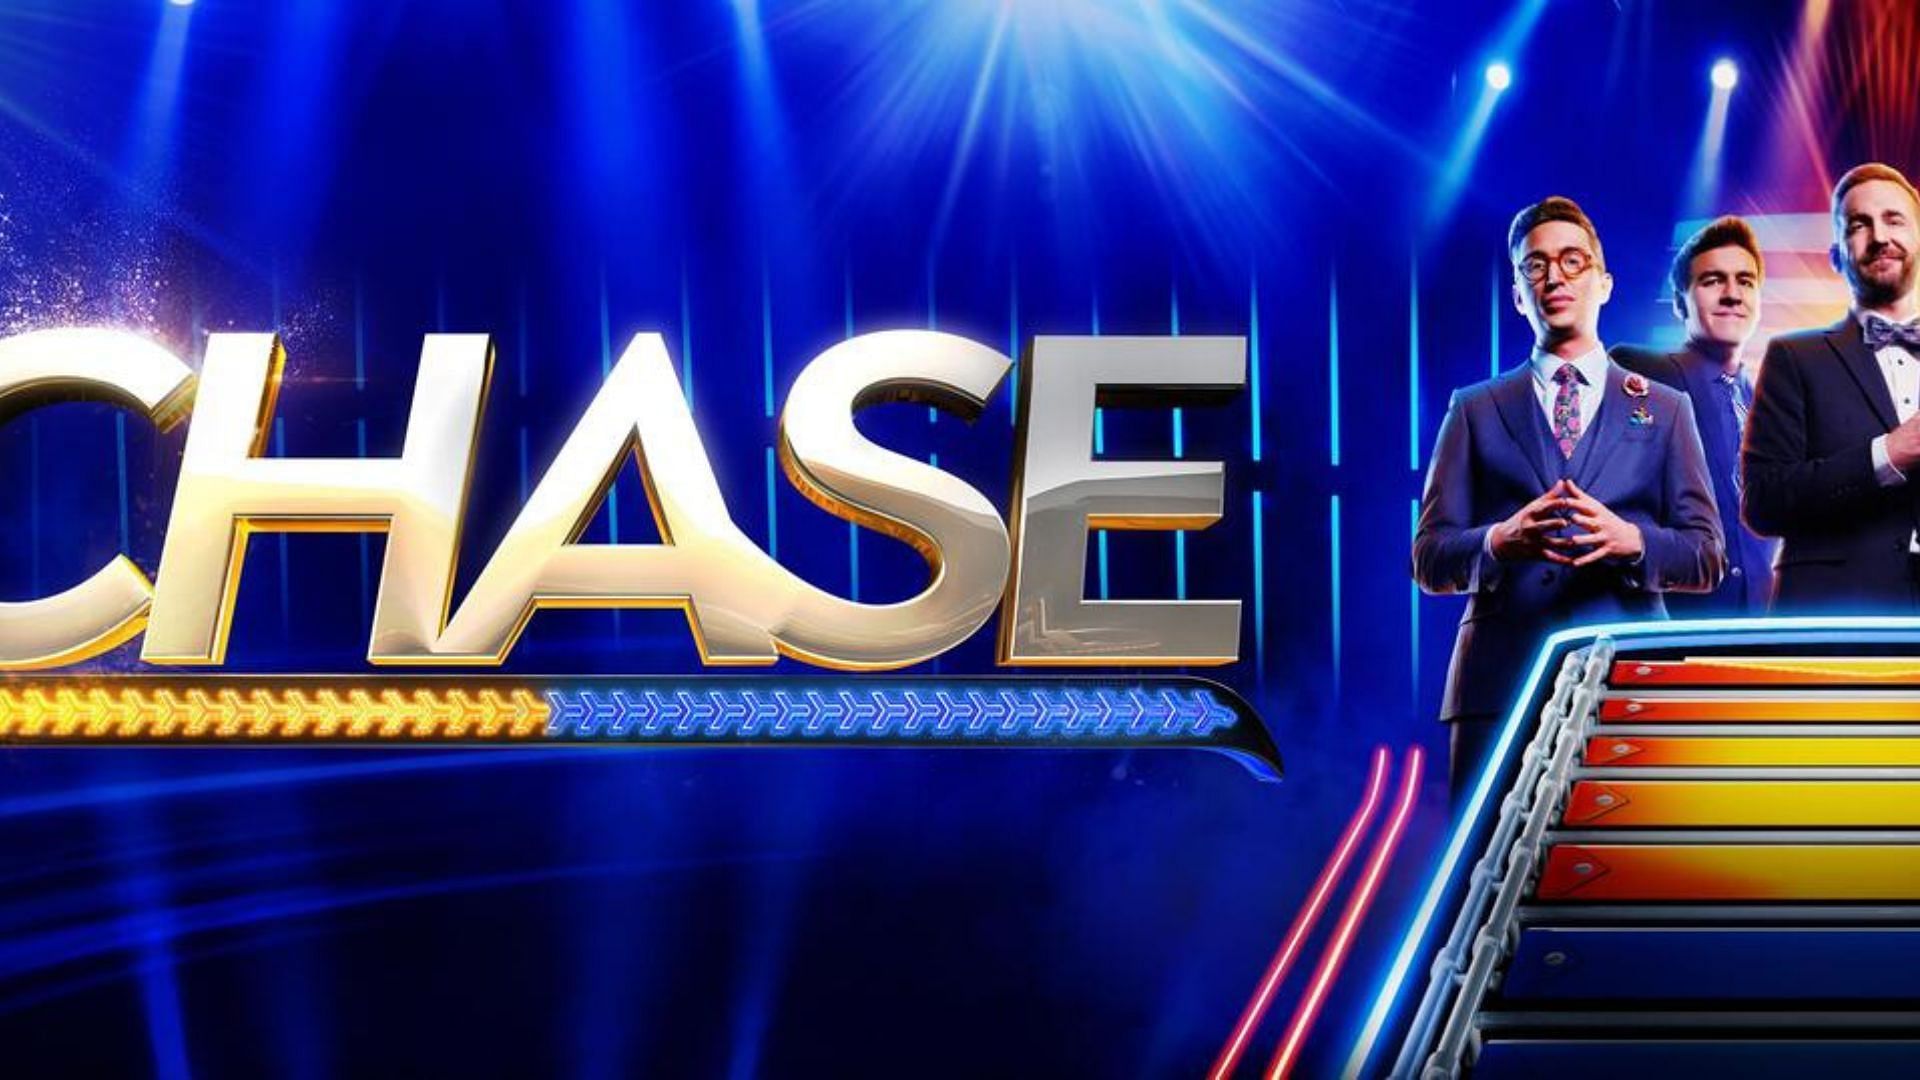 The official poster of The Chase (Image via ABC)